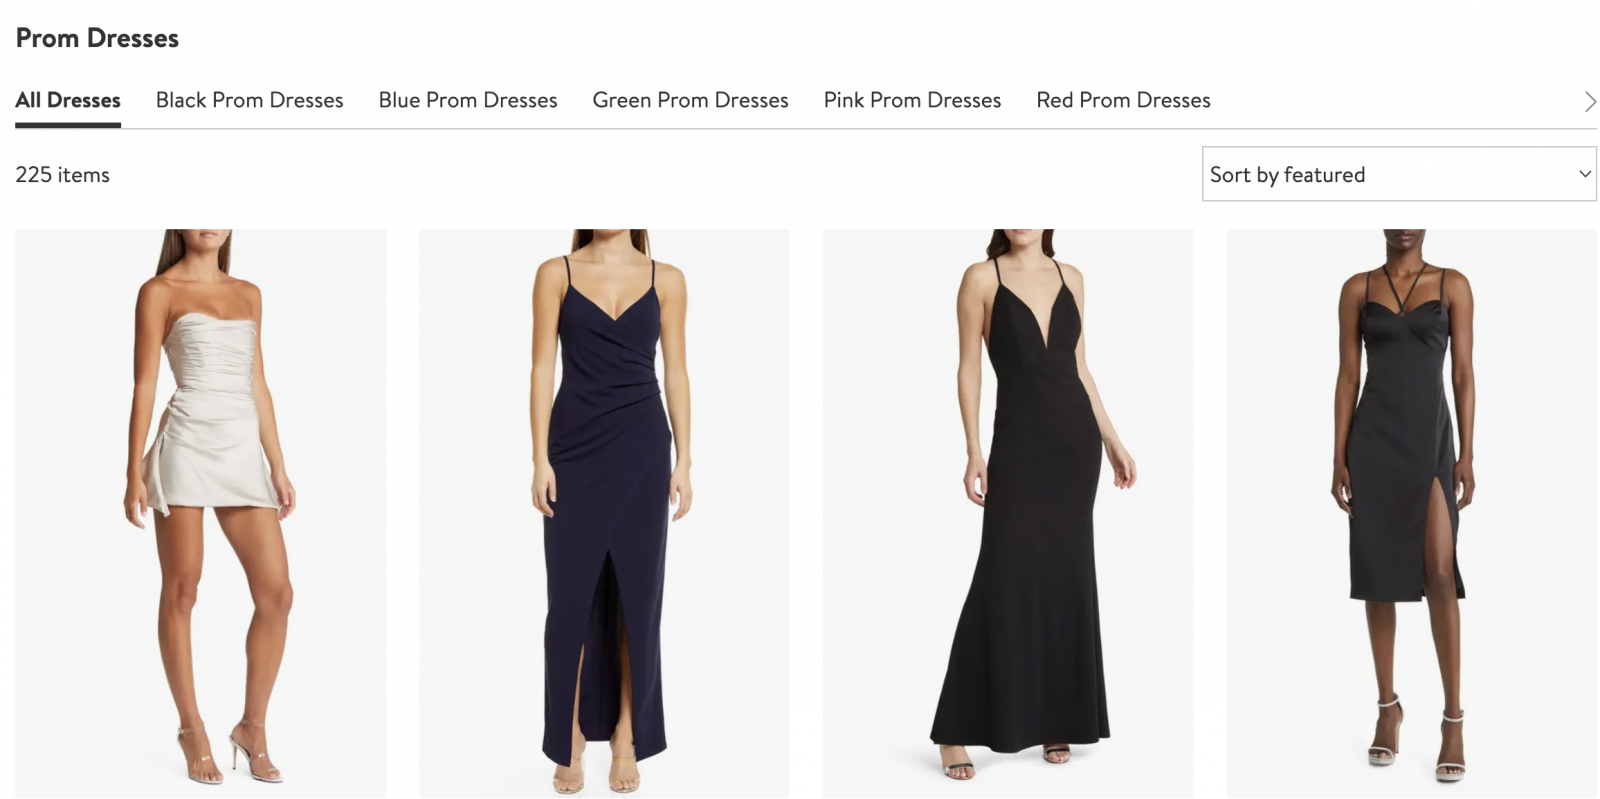 Save on prom dresses with Nordstrom coupon codes!